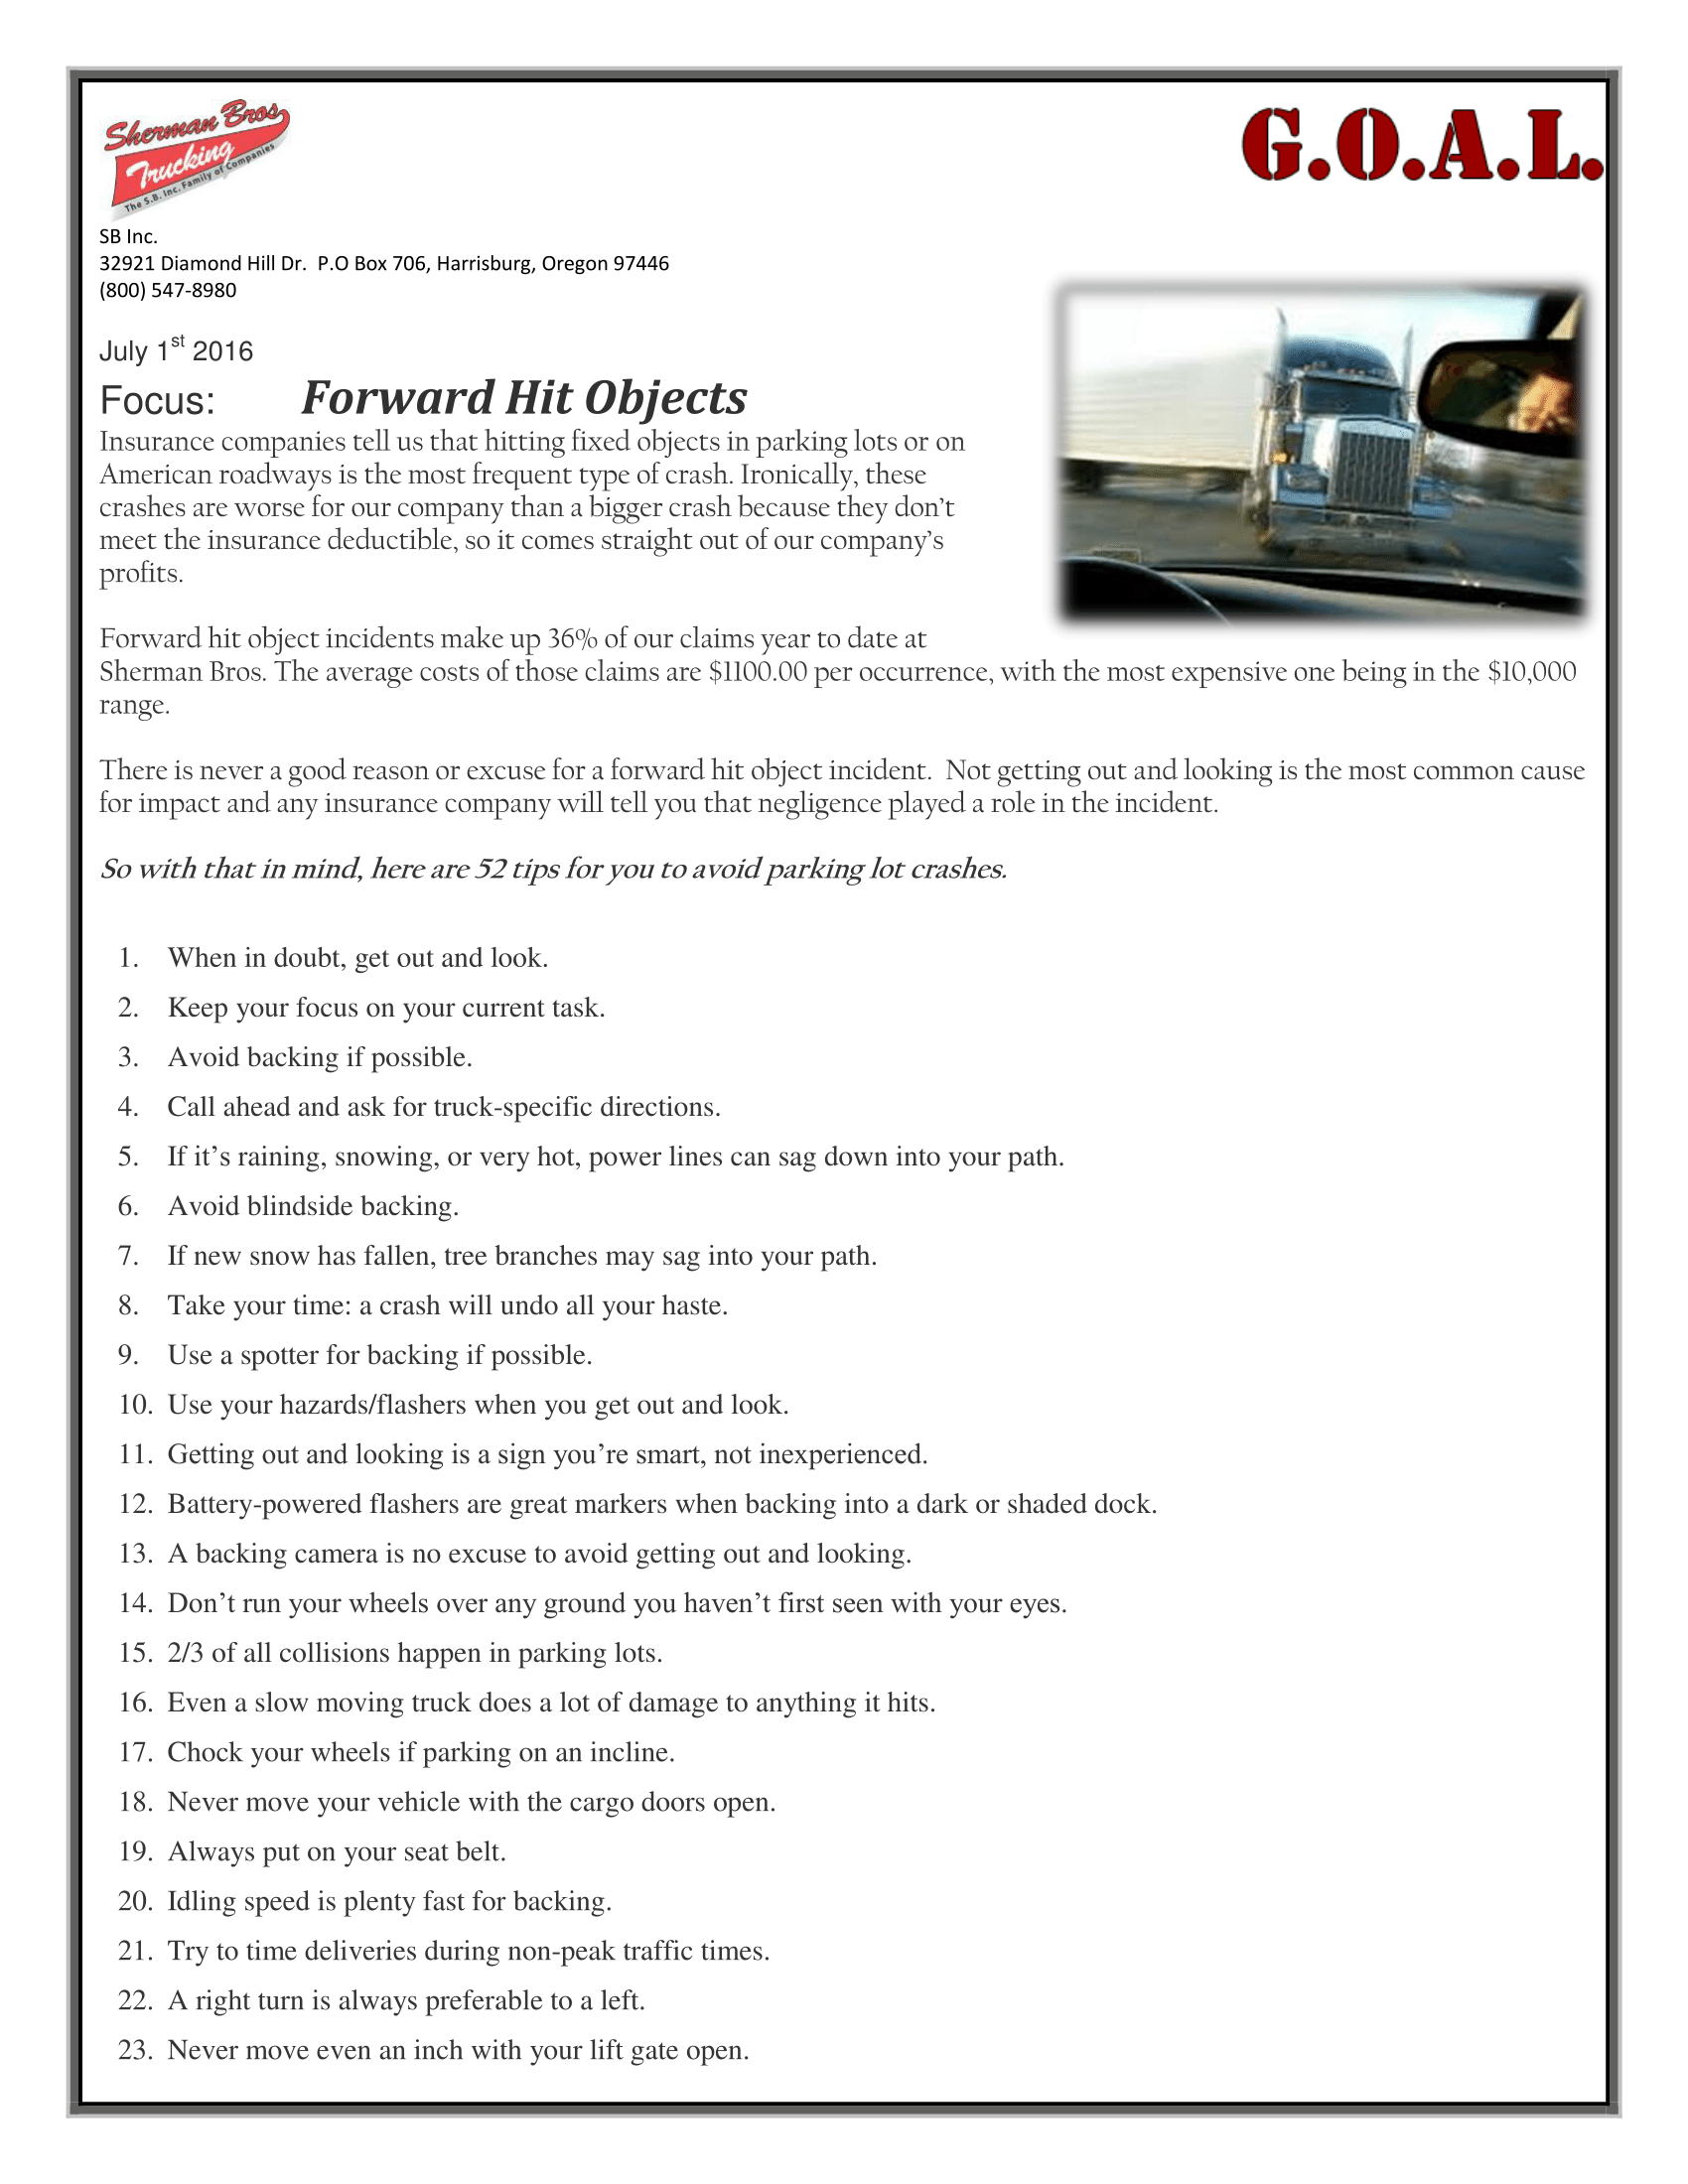 July - Forward Hit Objects-1.png